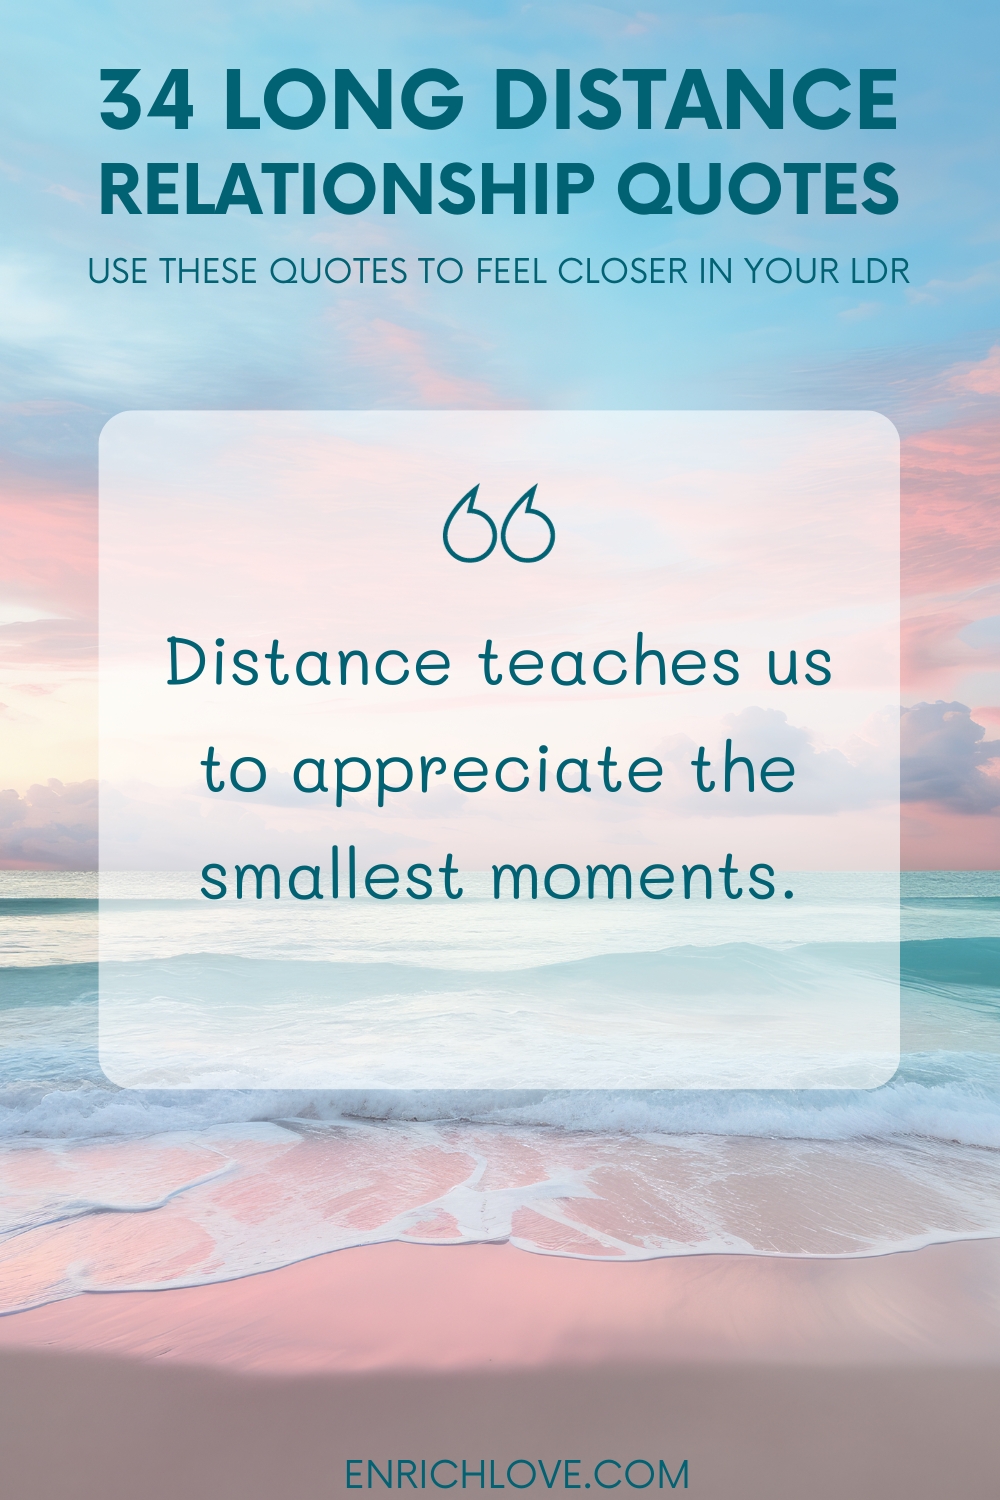 34 Long Distance Relationship Quotes - Distance teaches us to appreciate the smallest moments.